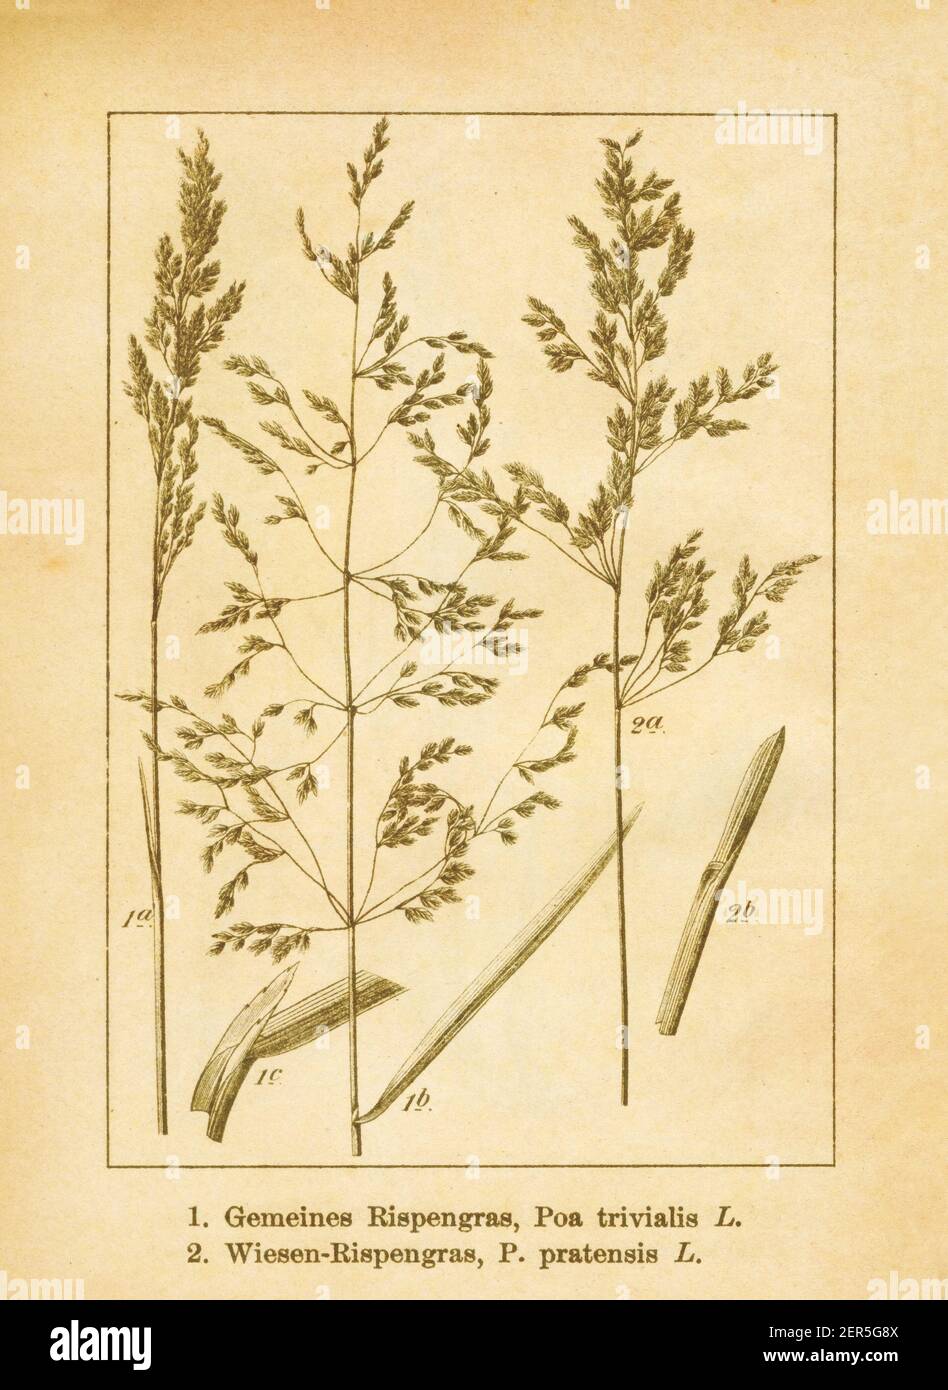 Antique illustration of poa trivialis (also known as rough bluegrass or rough-stalked meadow grass) and poa pratensis (also known as Kentucky bluegras Stock Photo